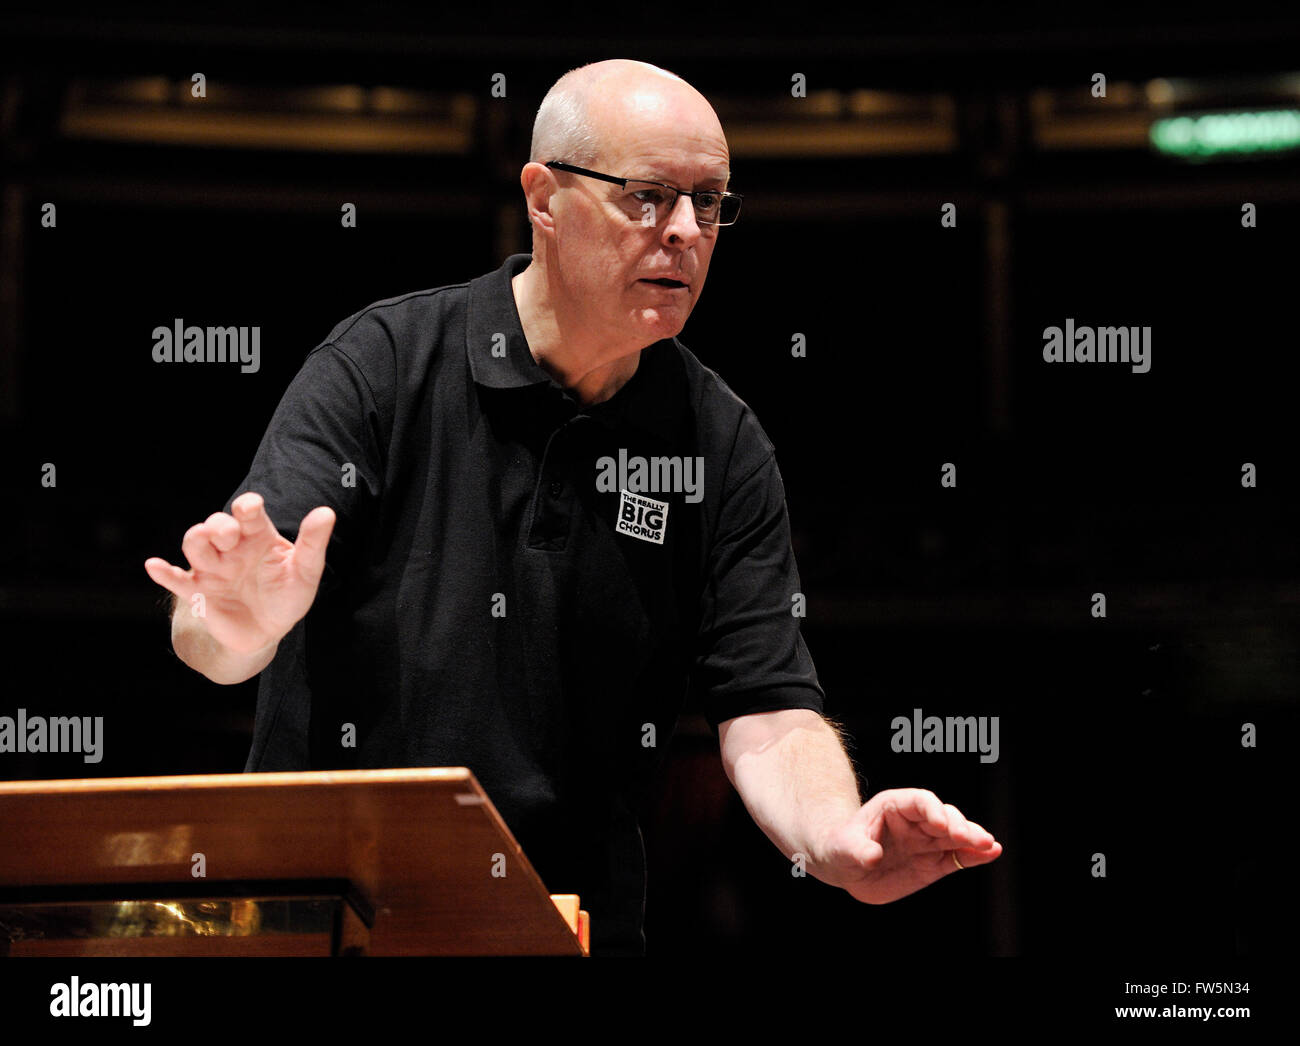 Brian Kay, conductor, in rehearsal with The Really Big Chorus and orchestra for Concerts From Scratch (and wearing T-shirt logo), Royal Albert Hall, London: Handel's Messiah. Has just taken over the musical directorship of the RBC. Conductor, presenter for BBC Radio and Televsion, a founder member 1978 and bass singer with The King's Singers, conductor of Vaughan Williams' Leith Hill Musical Festival in Surrey; he also sang the voice of Papageno in the Hollywood movie ÔAmadeus' (his wife, the soprano Gillian Fisher sang Papagena), has been the lowest frog on a Paul McCartney single, one of the Stock Photo